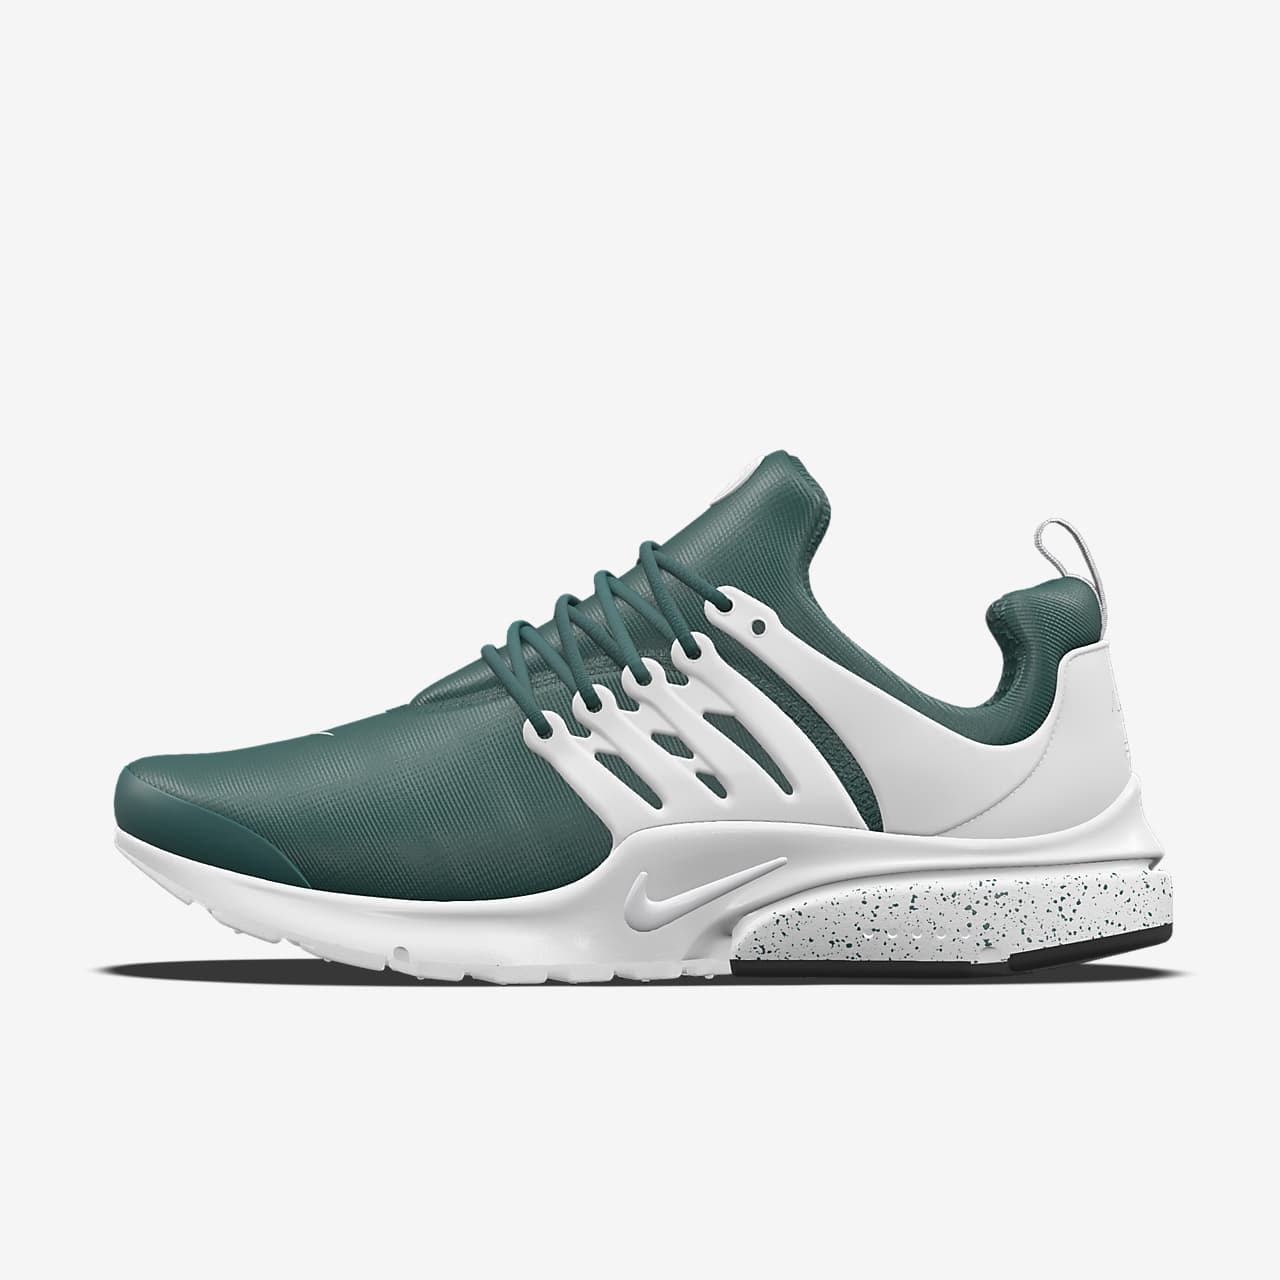 Chaussure personnalisable Nike Air Presto By You pour homme